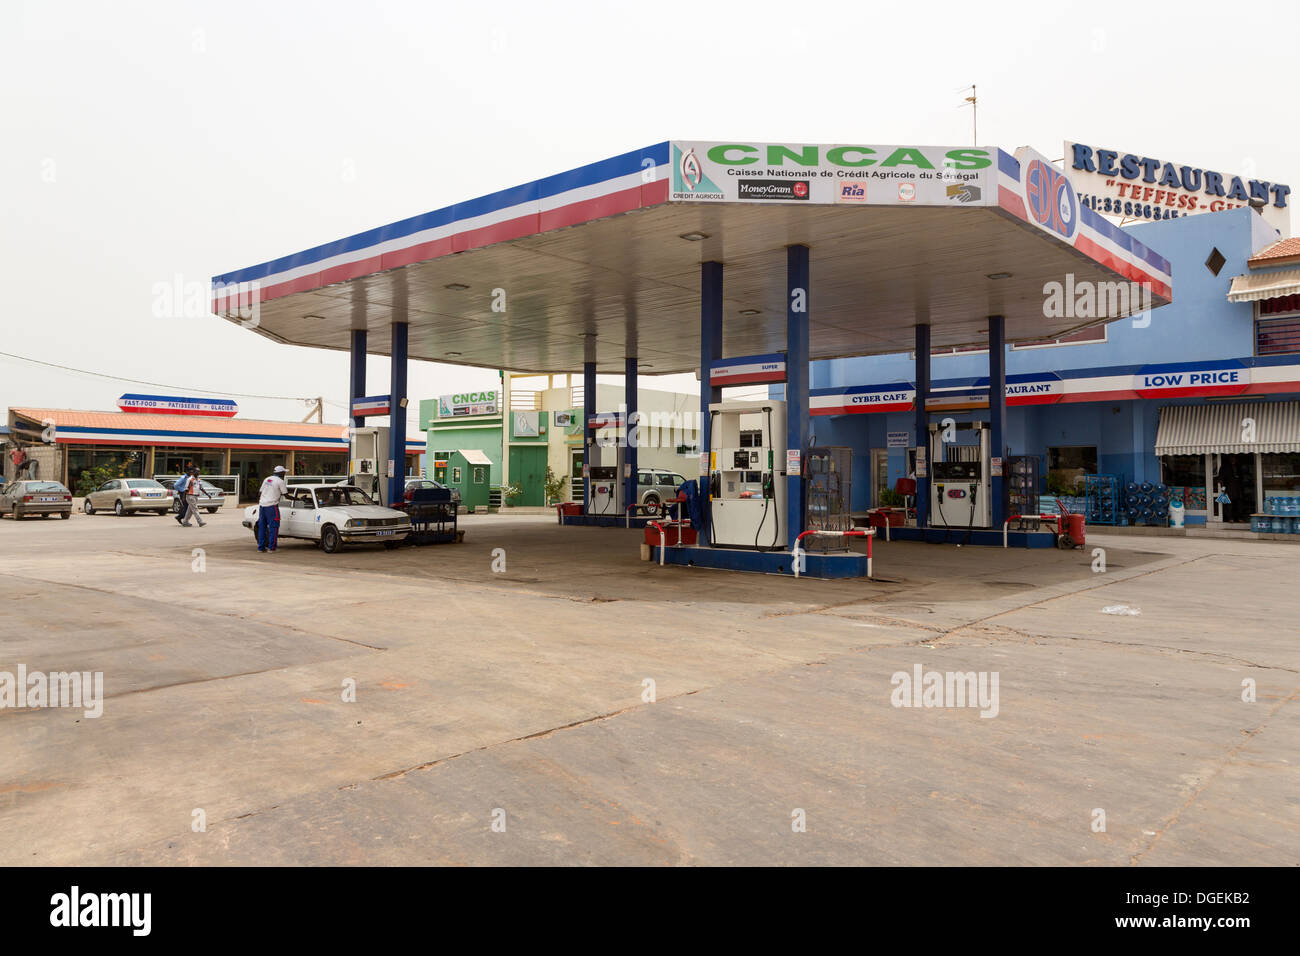 Senegal. Modern Gas Station Complex with Cyber Cafe and Restaurant, on the outskirts of Dakar. Stock Photo